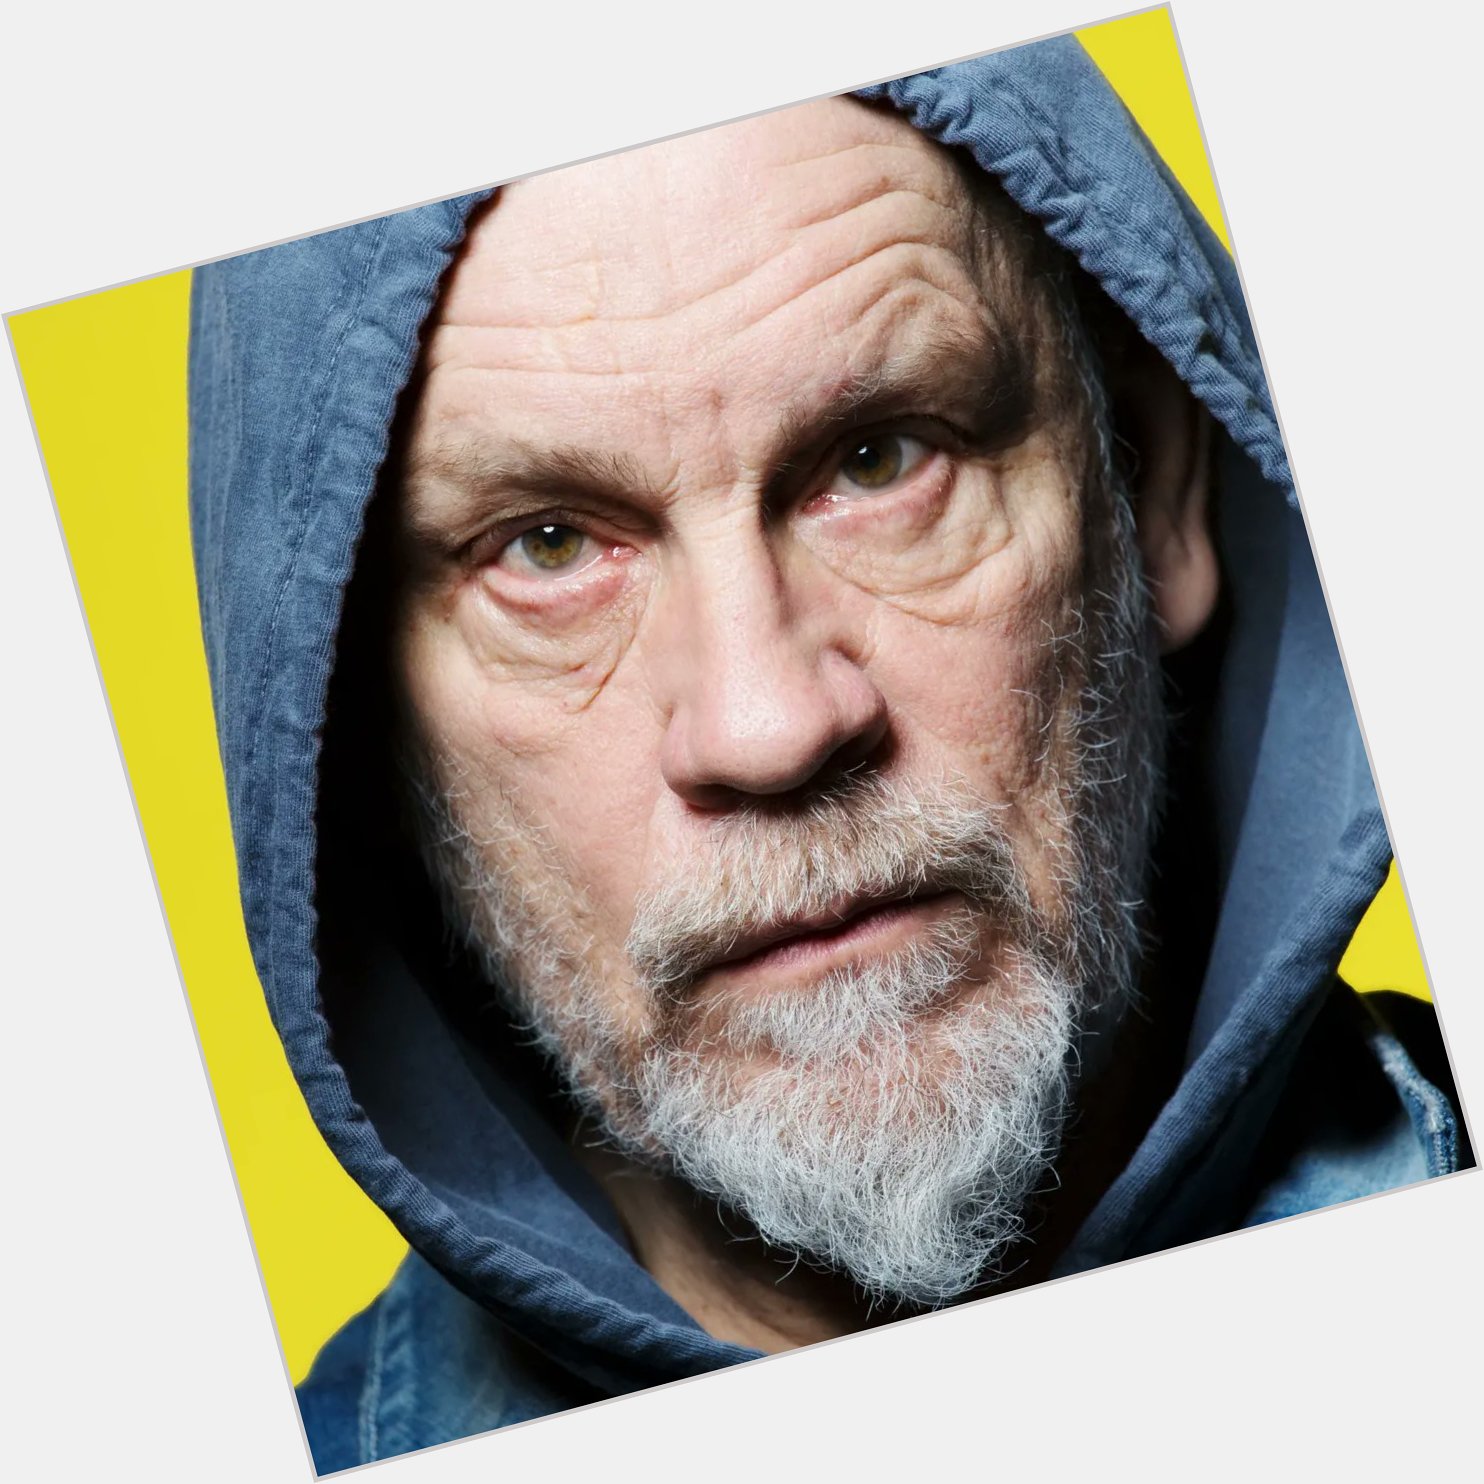 Happy belated birthday to the magnificent John Malkovich. 